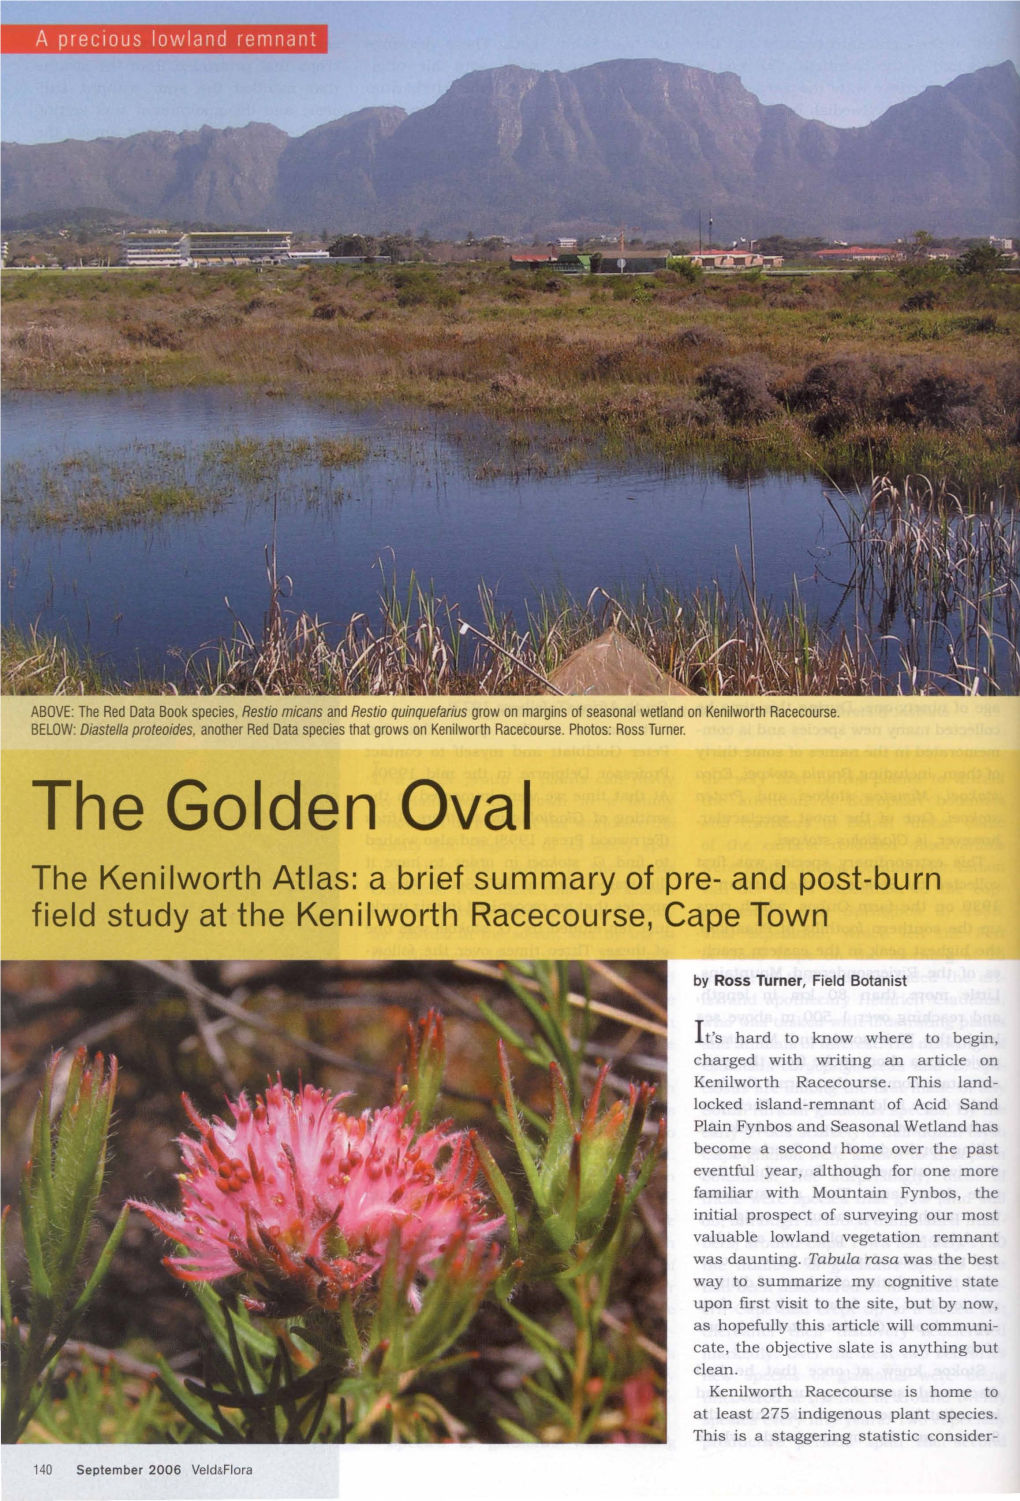 The Golden Oval the Kenilworth Atlas: a Brief Summary of Pre- and Post-Burn Field Study at the Kenilworth Racecourse, Cape Town